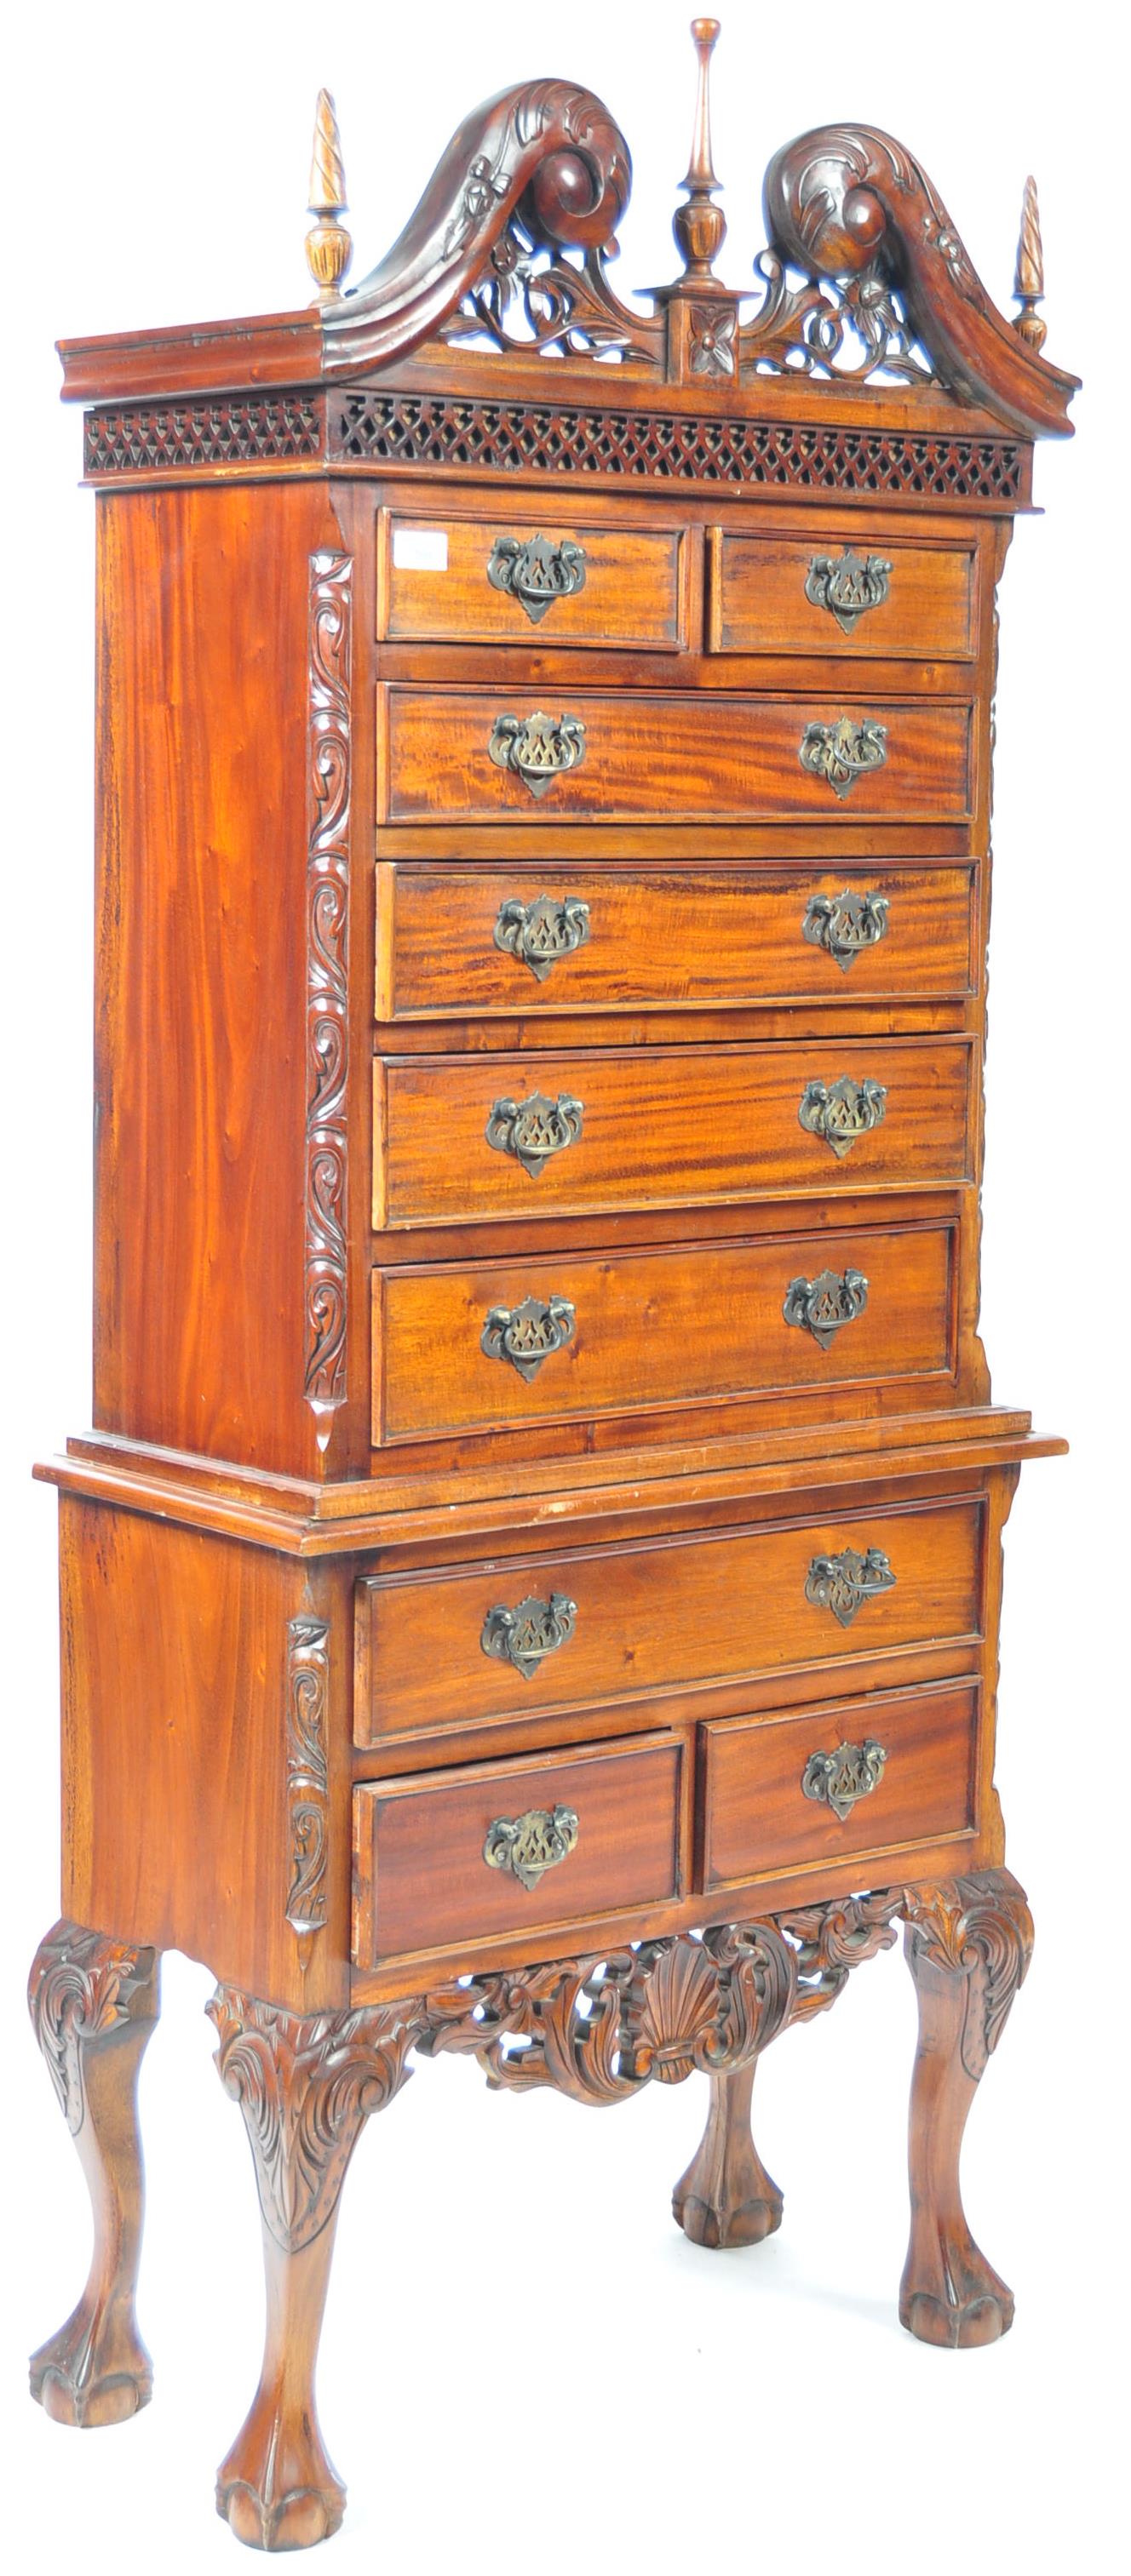 ANTIQUE STYLE MAHOGANY CHEST ON CHEST OF DRAWERS